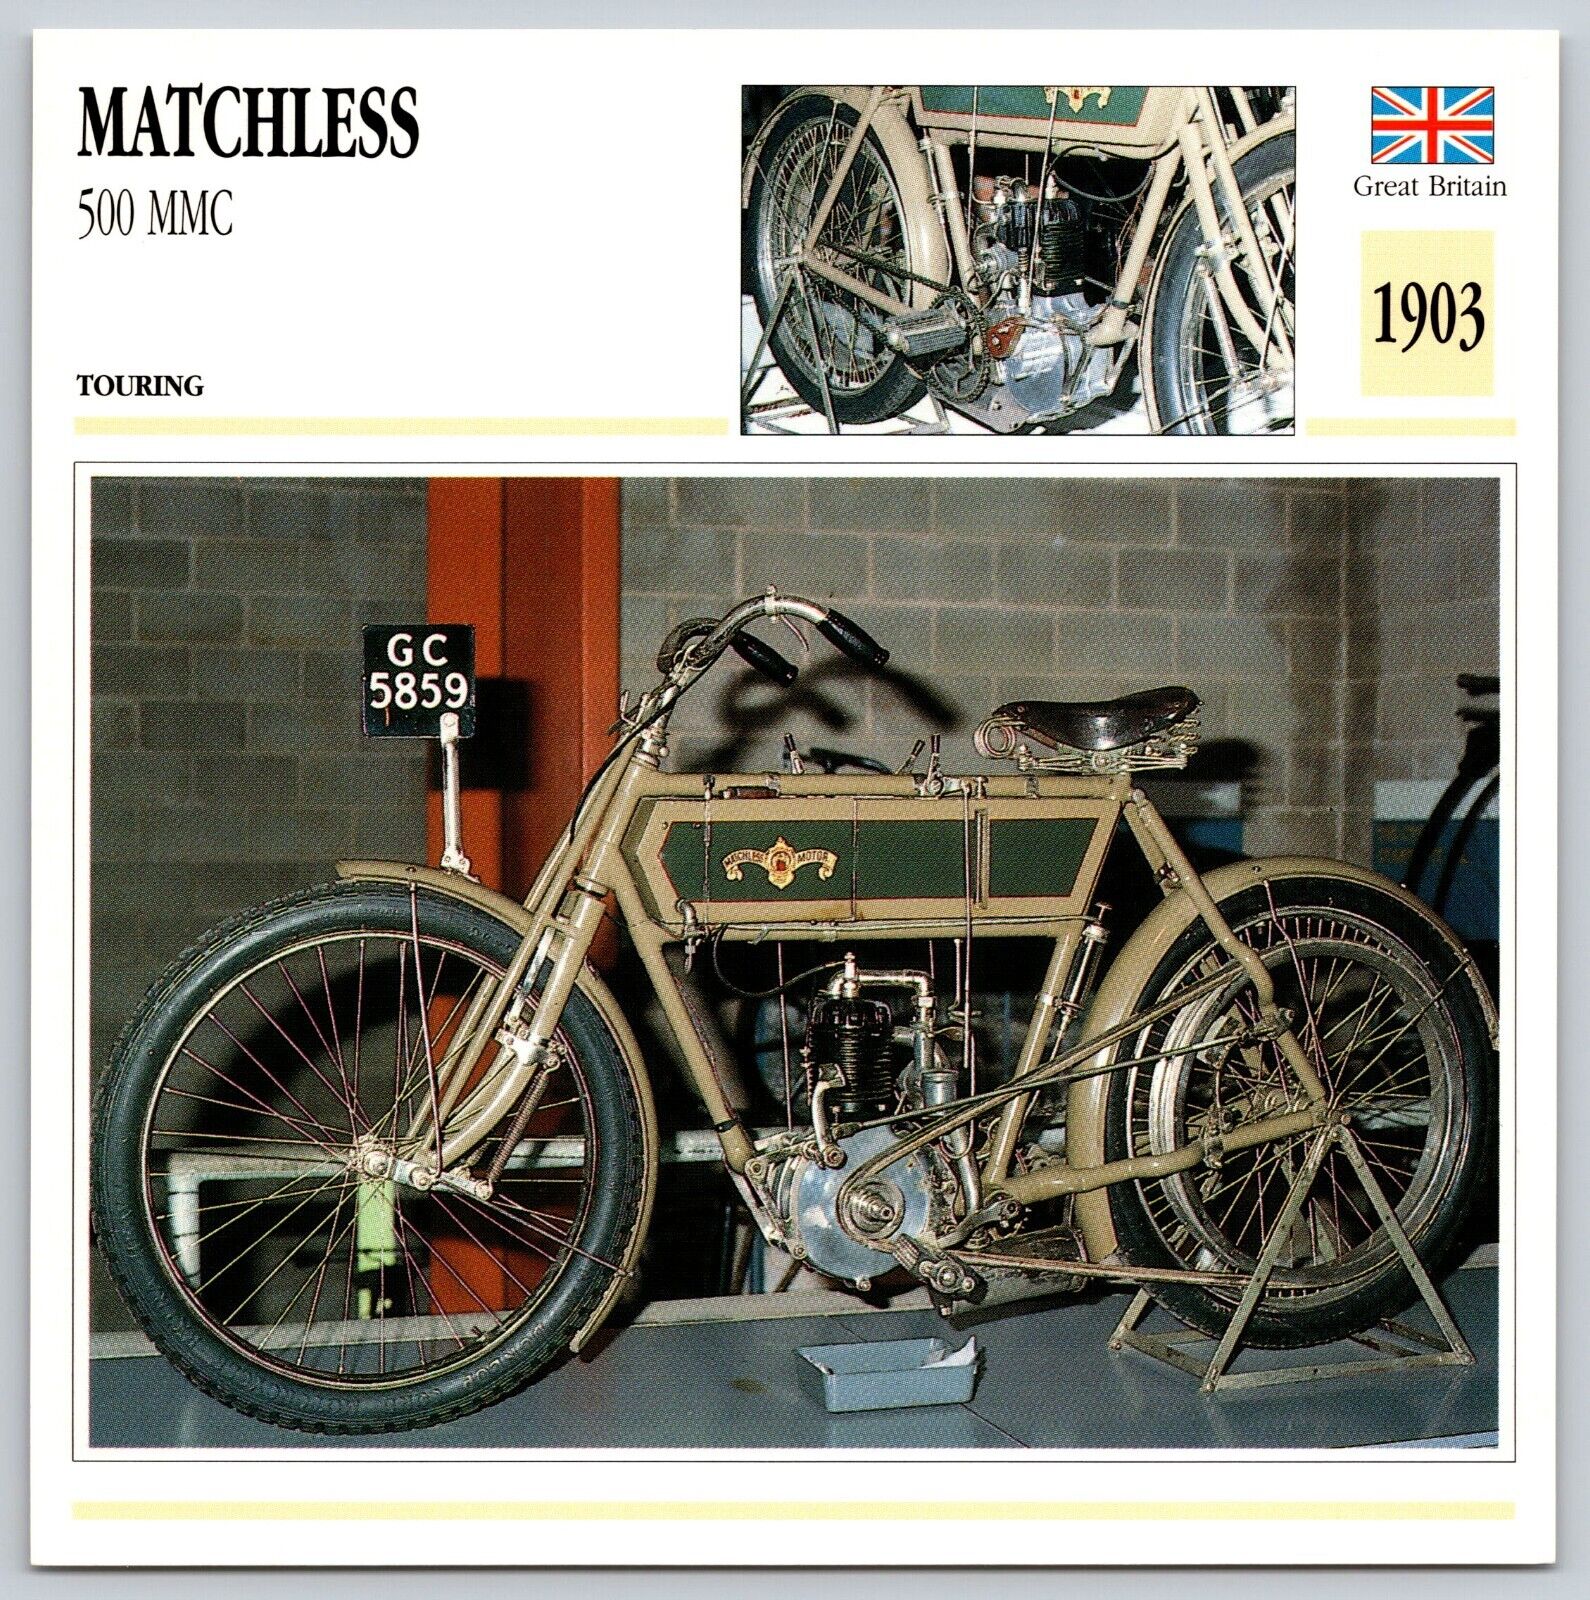 Matchless 500 MMC 1903 Great Britain Edito Service Atlas Motorcycle Card